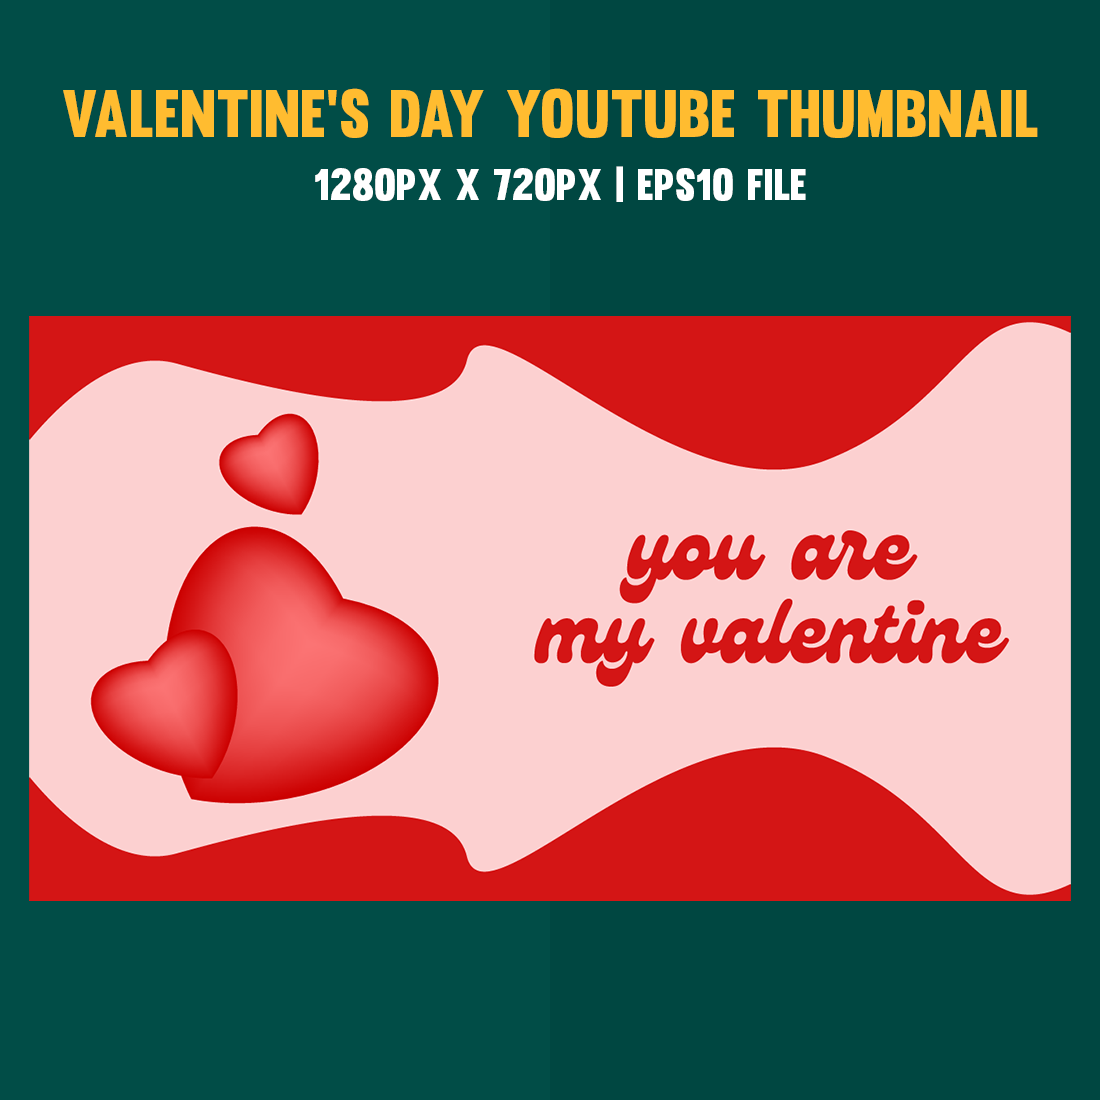 You are my valentine Valentines Day Youtube Thumbnail preview image.